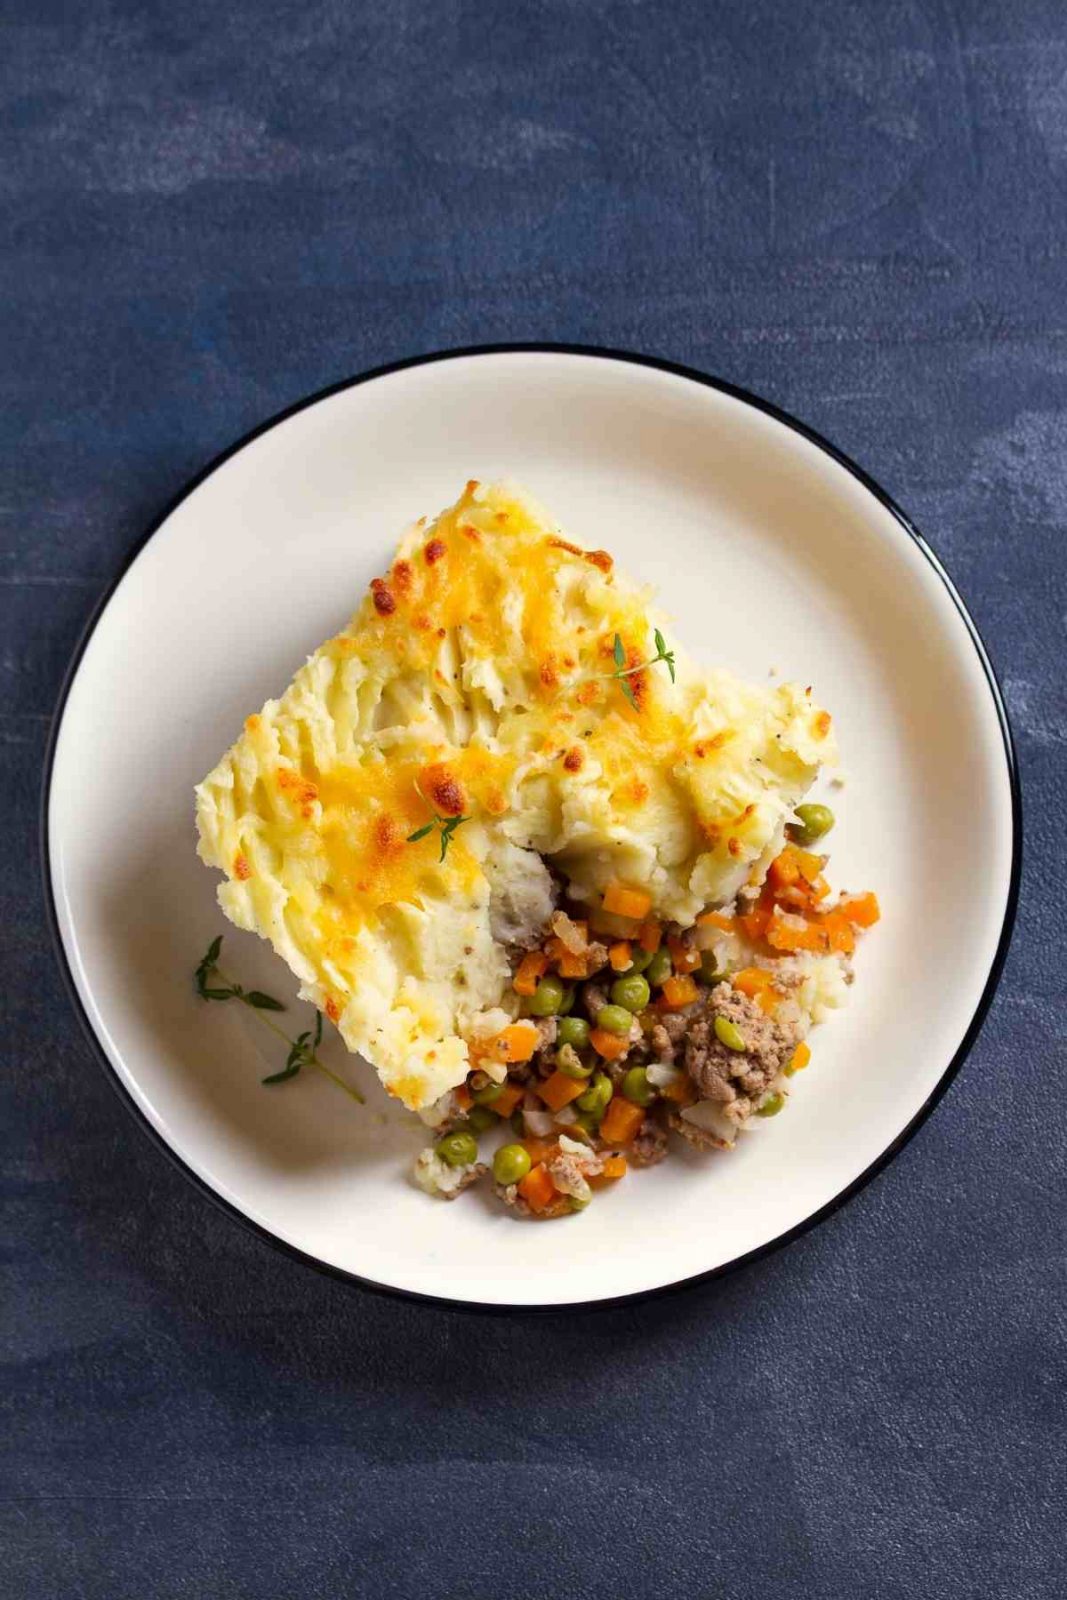 Are you looking for the best shepherd’s pie recipe? Then you’ve come to the right place! Here you’ll get a shepherd's pie recipe that is loaded with beef, vegetables, herbs and potatoes, and one irresistible sauce. Plus, you’ll learn how you long to bake it and some tips and tricks too, that’ll help you get the best results every single time!